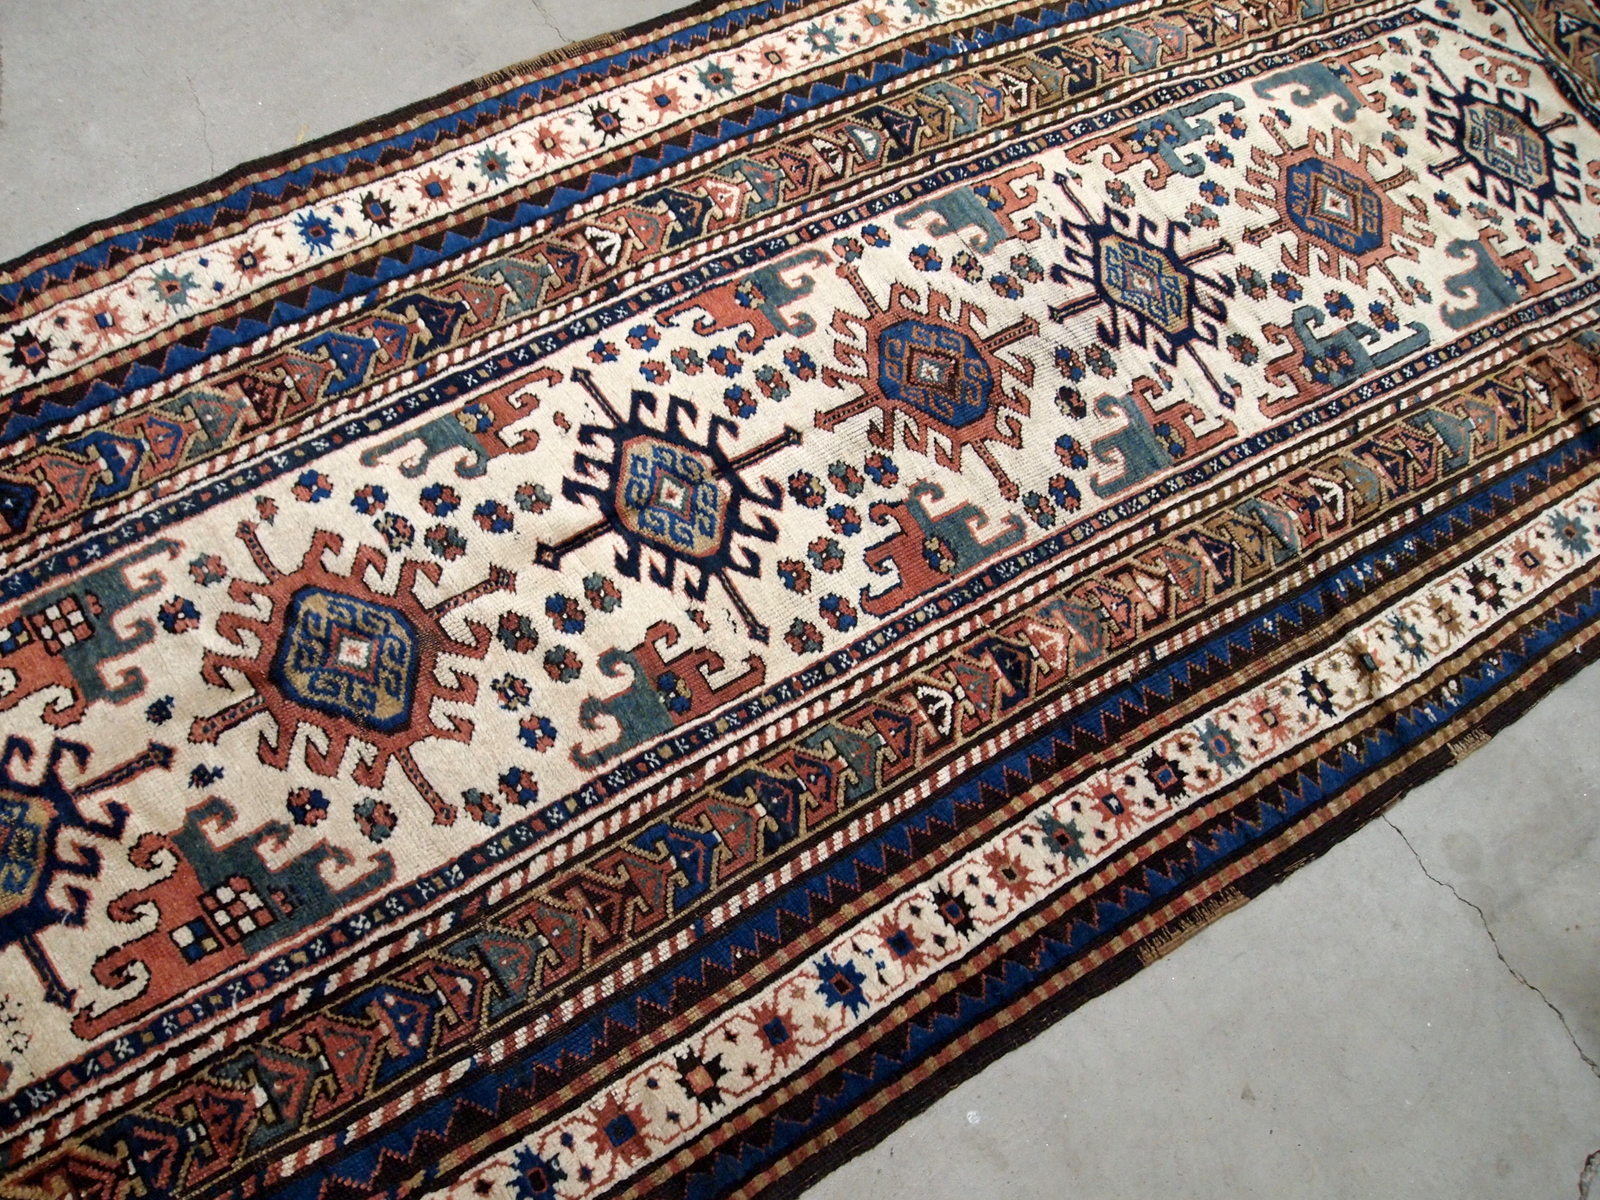 Handmade antique Caucasian Kazak rug in kele size. The rug is from the end of 19th century in original good condition.